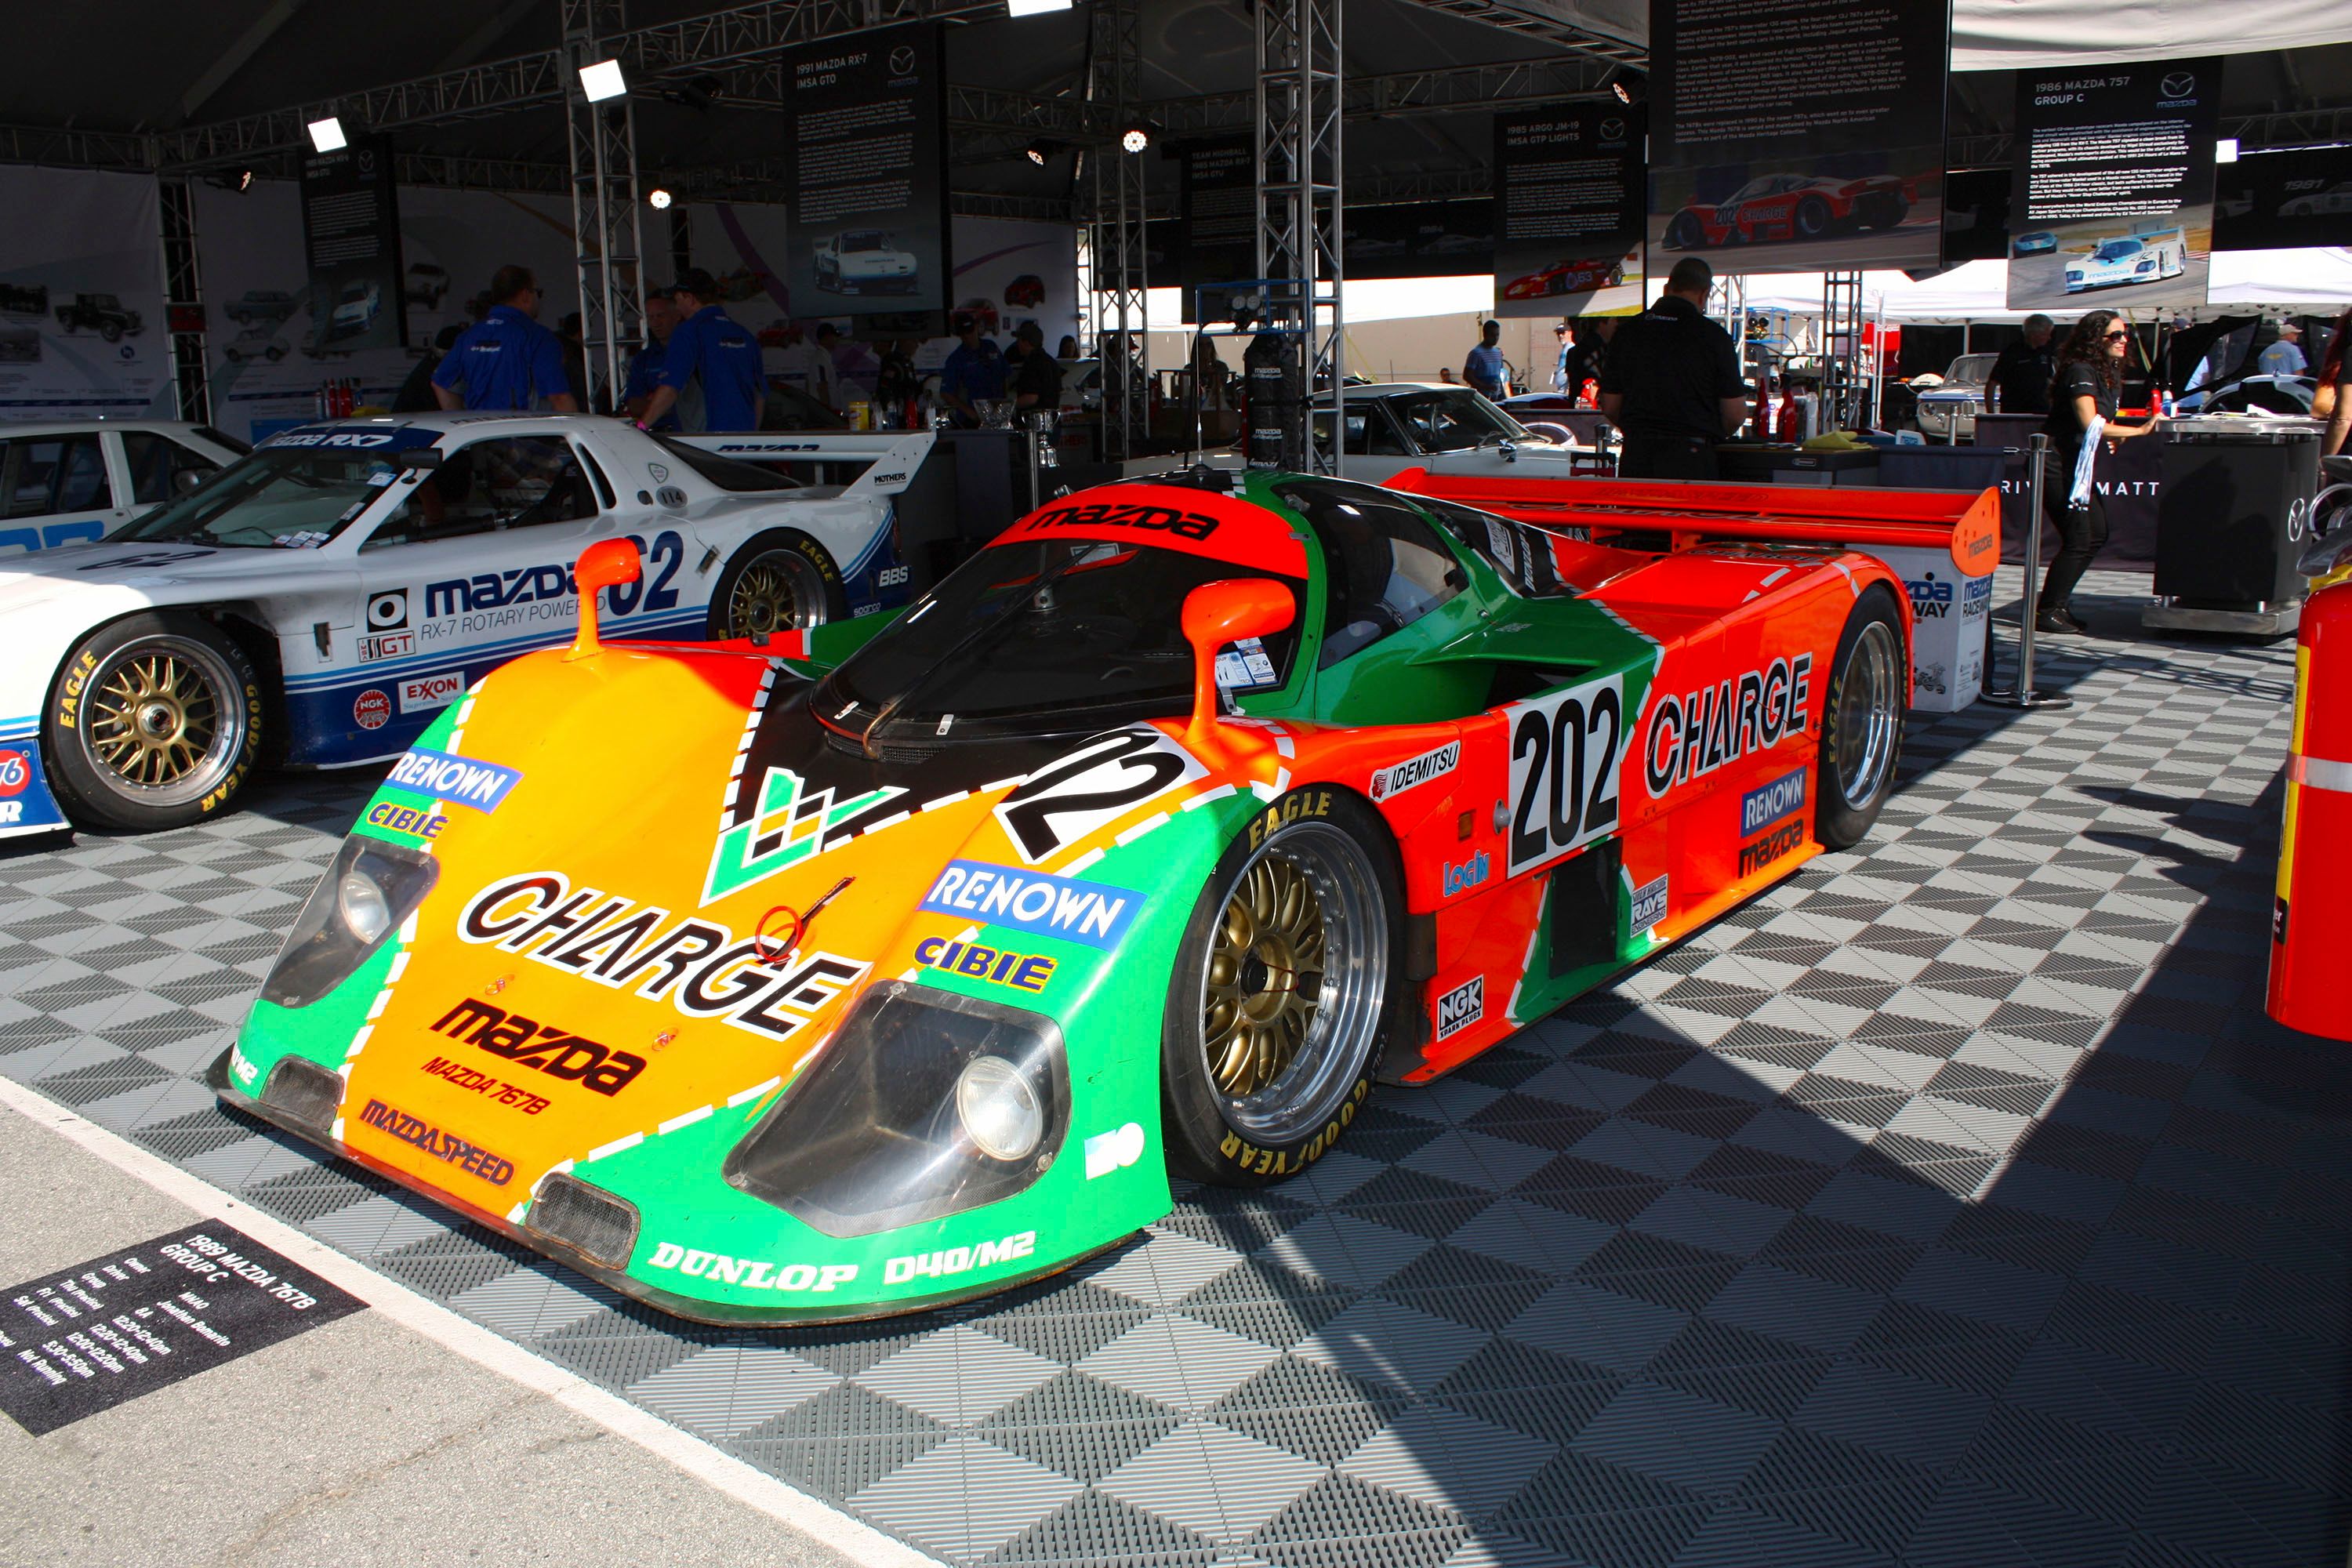 The 767B was born in 1989